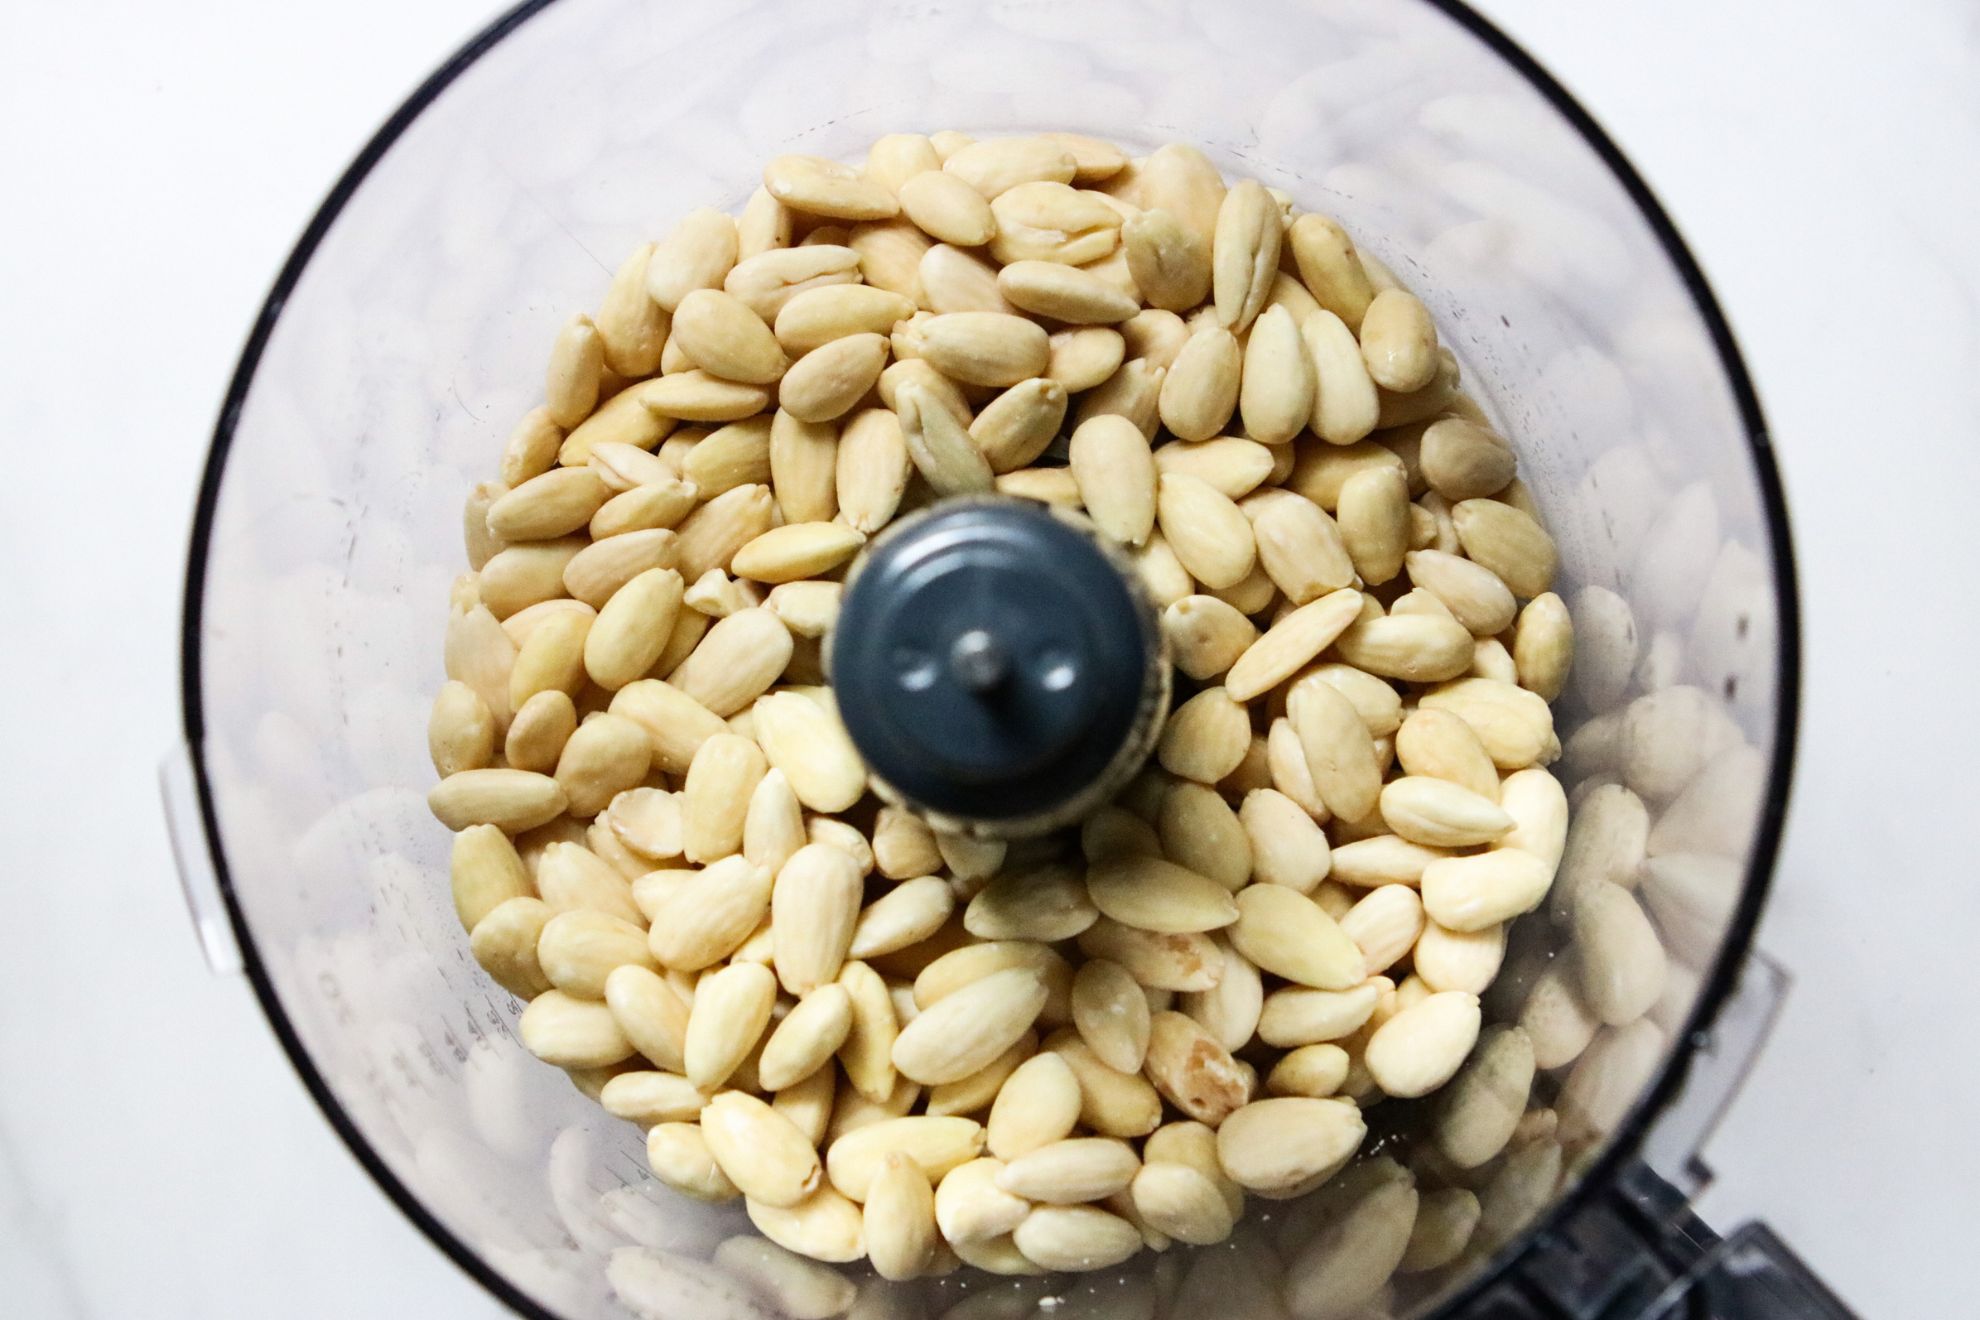 This is an overhead horizontal image of a food processor with blanched almonds in it. The food processor sits on a white counter.